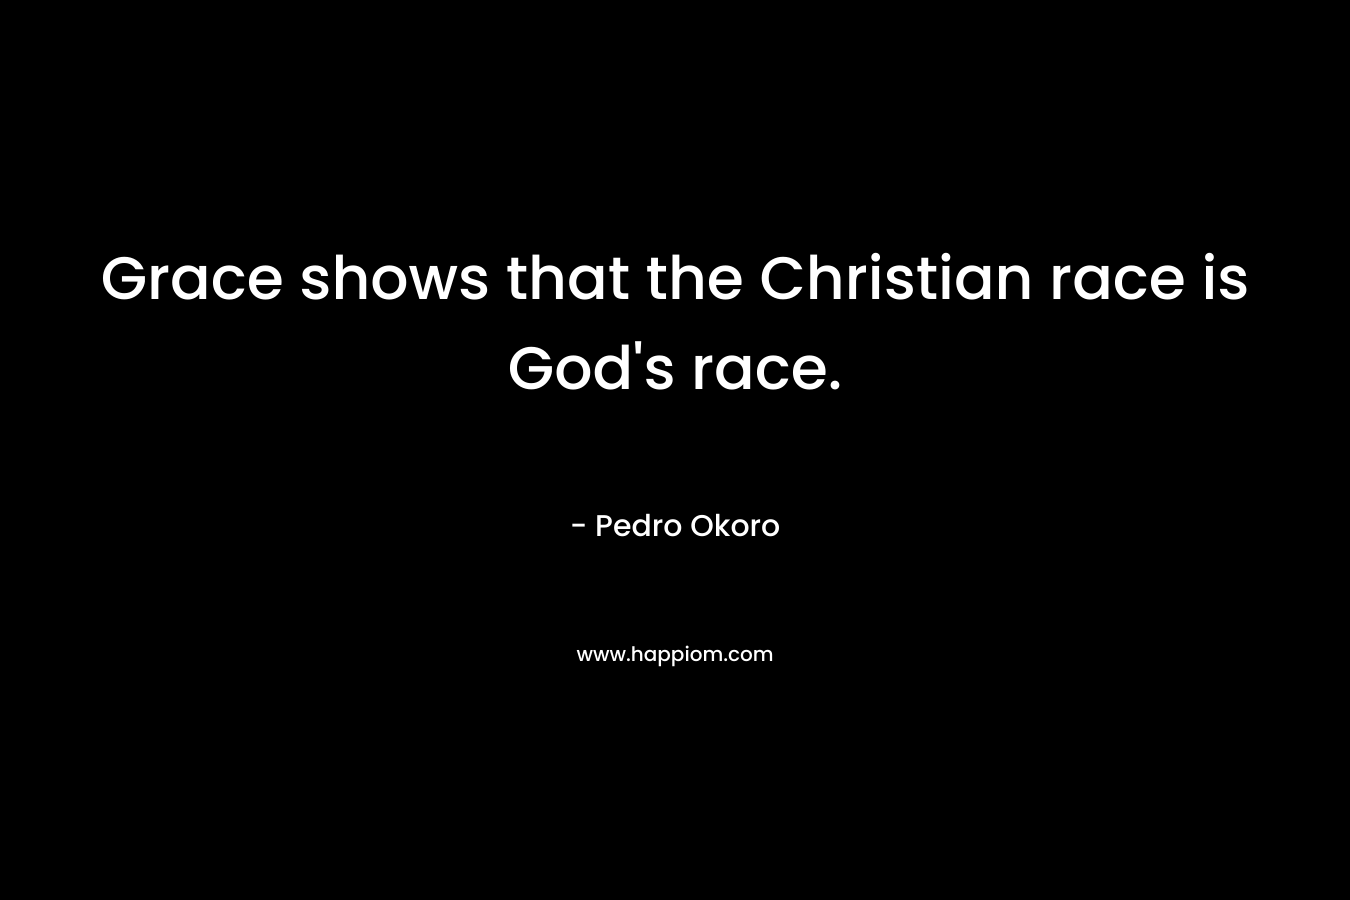 Grace shows that the Christian race is God's race.